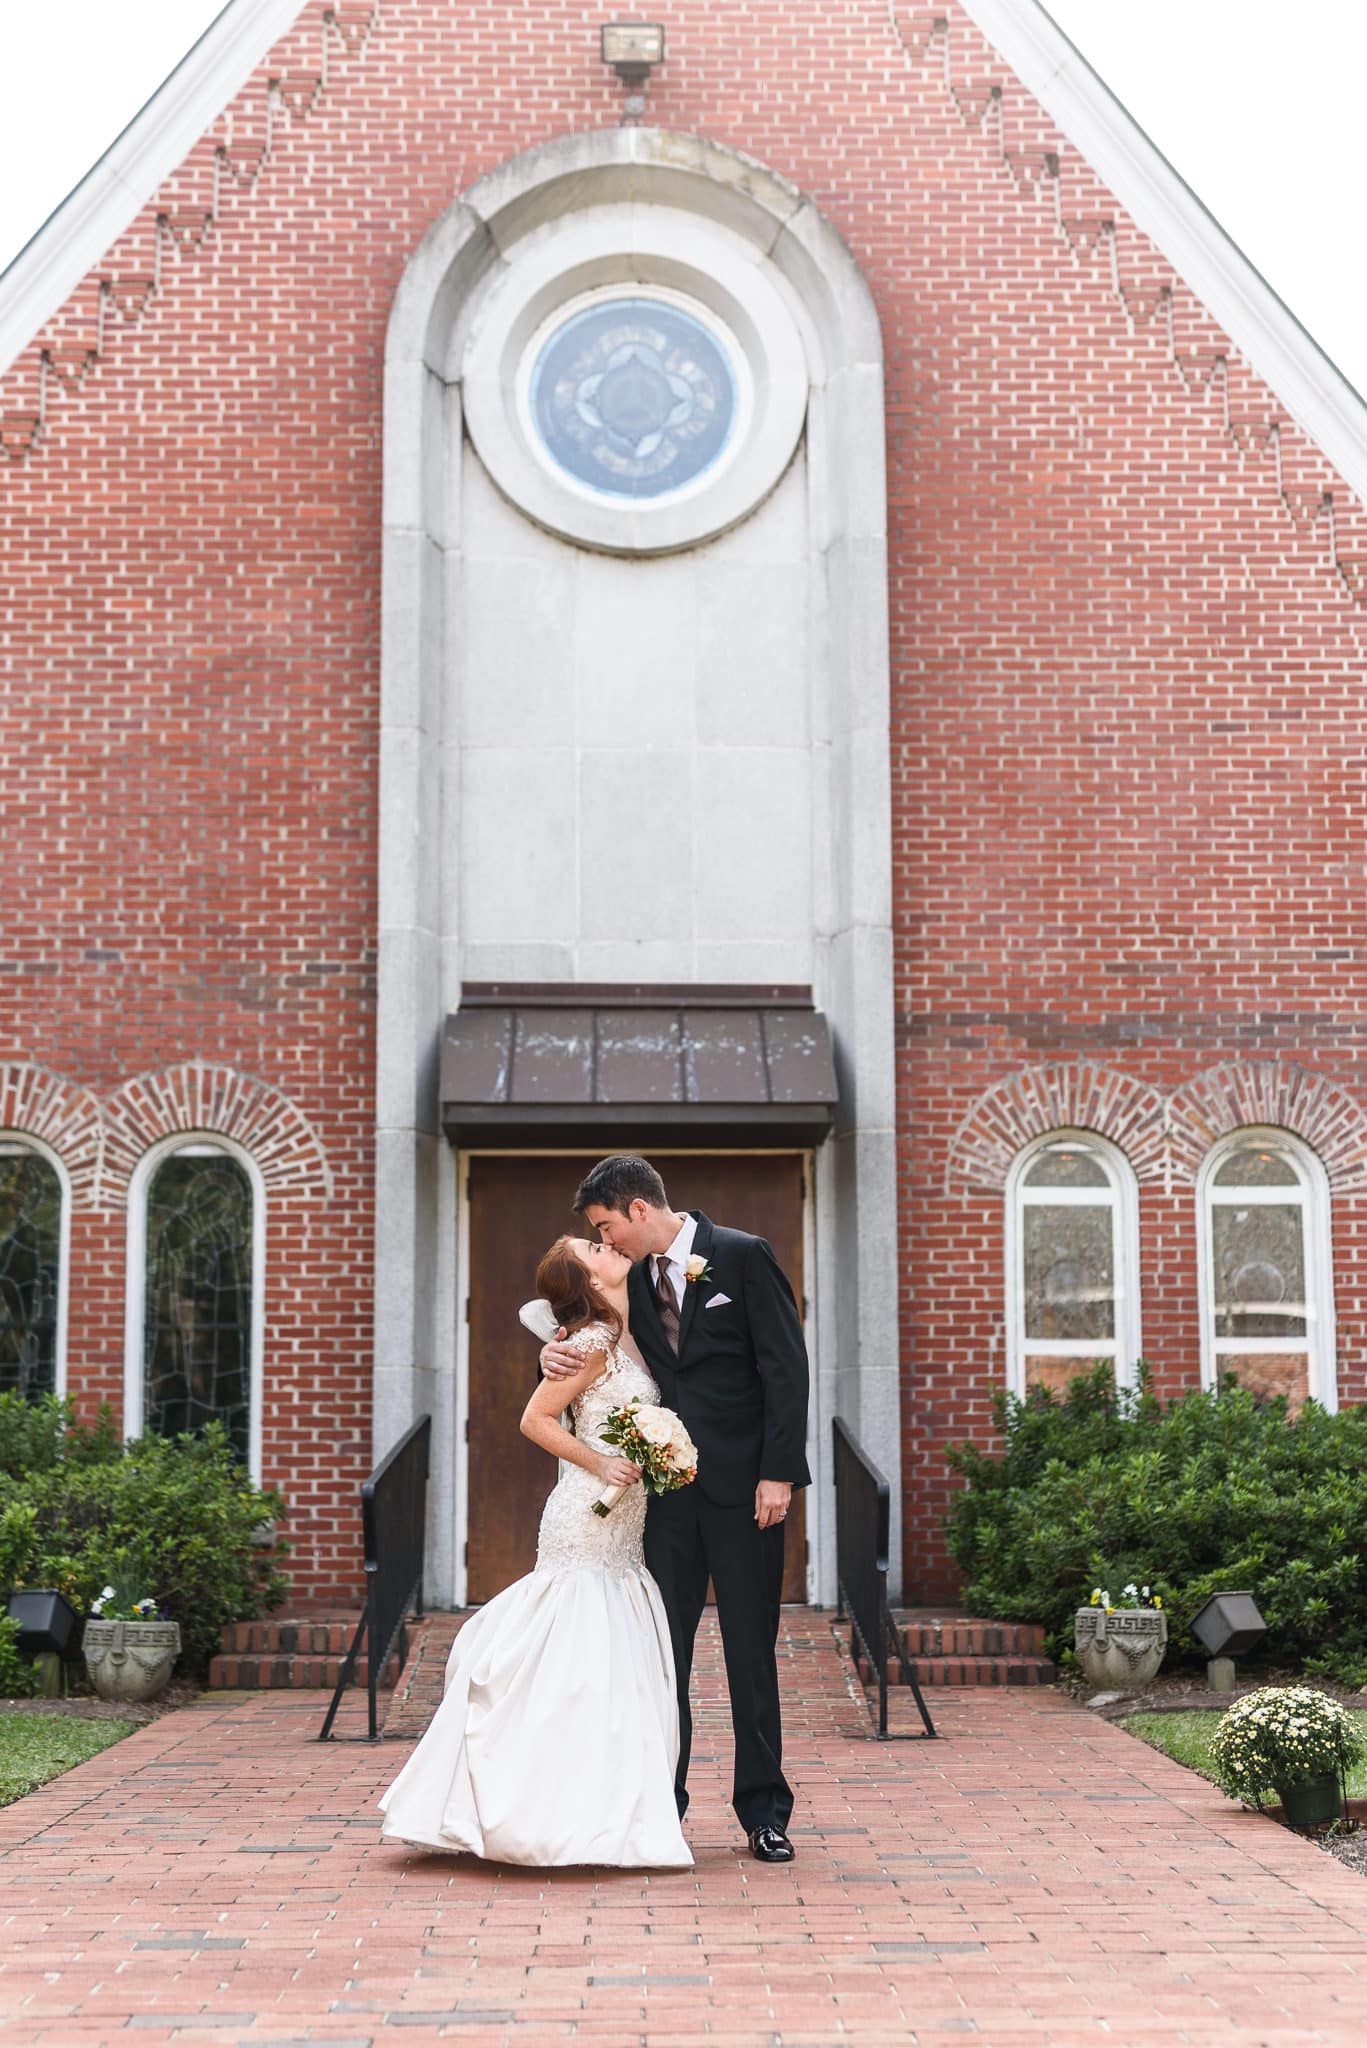 Kiss in front of the wedding location - Historic Church downtown Georgetown